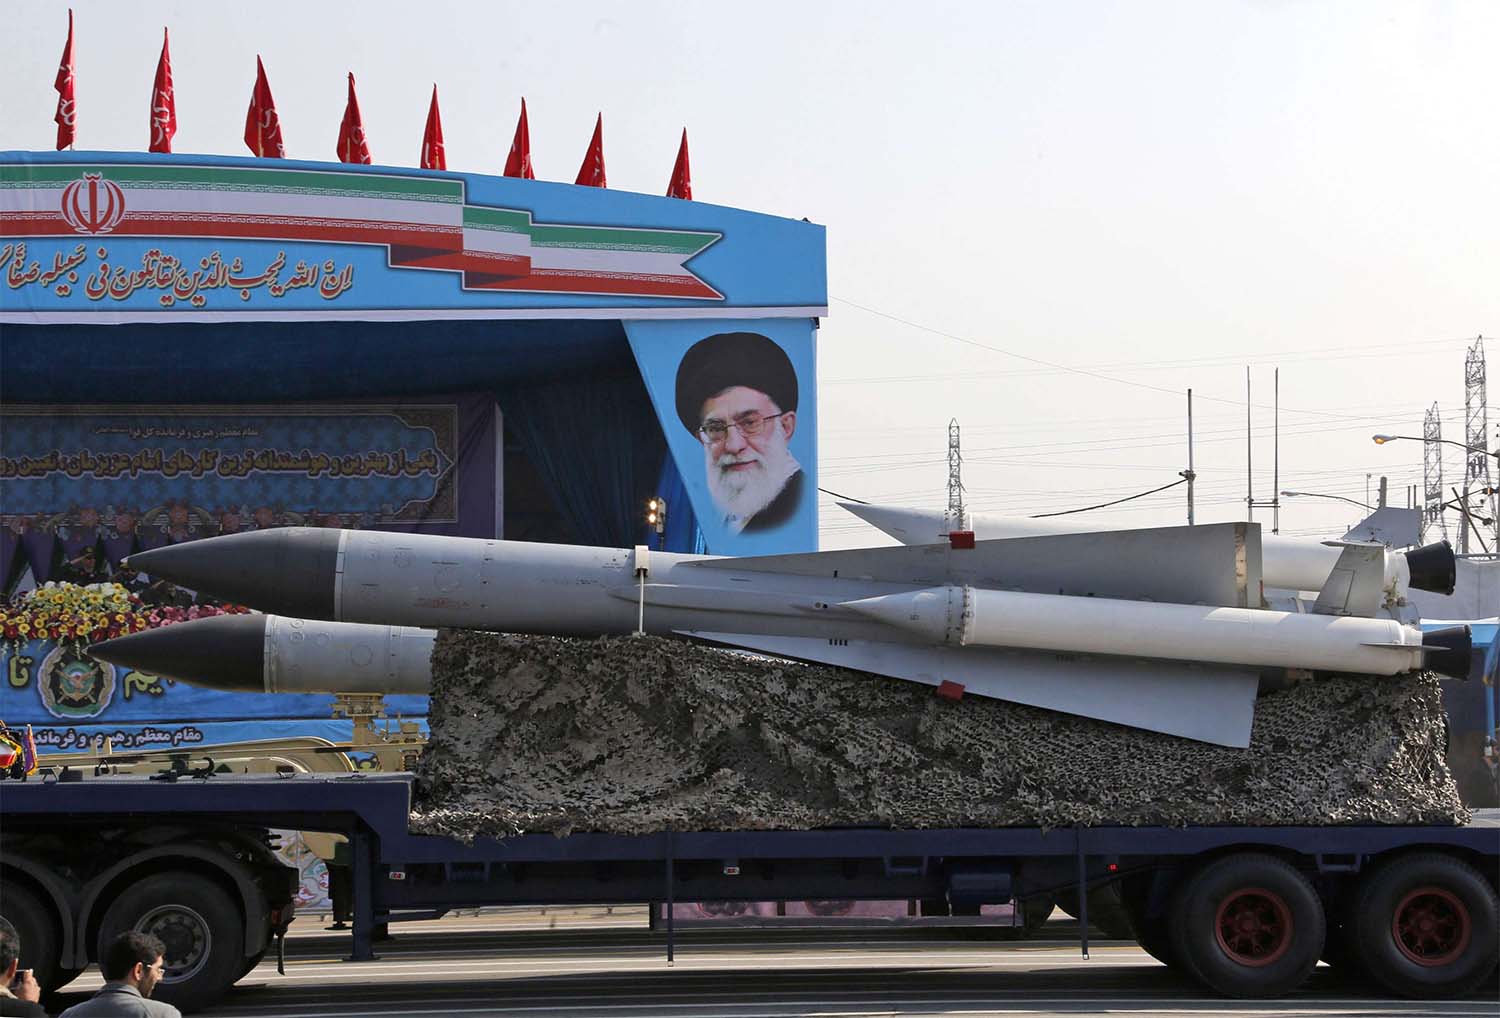 Iranian military truck carrying surface-to-air missiles 